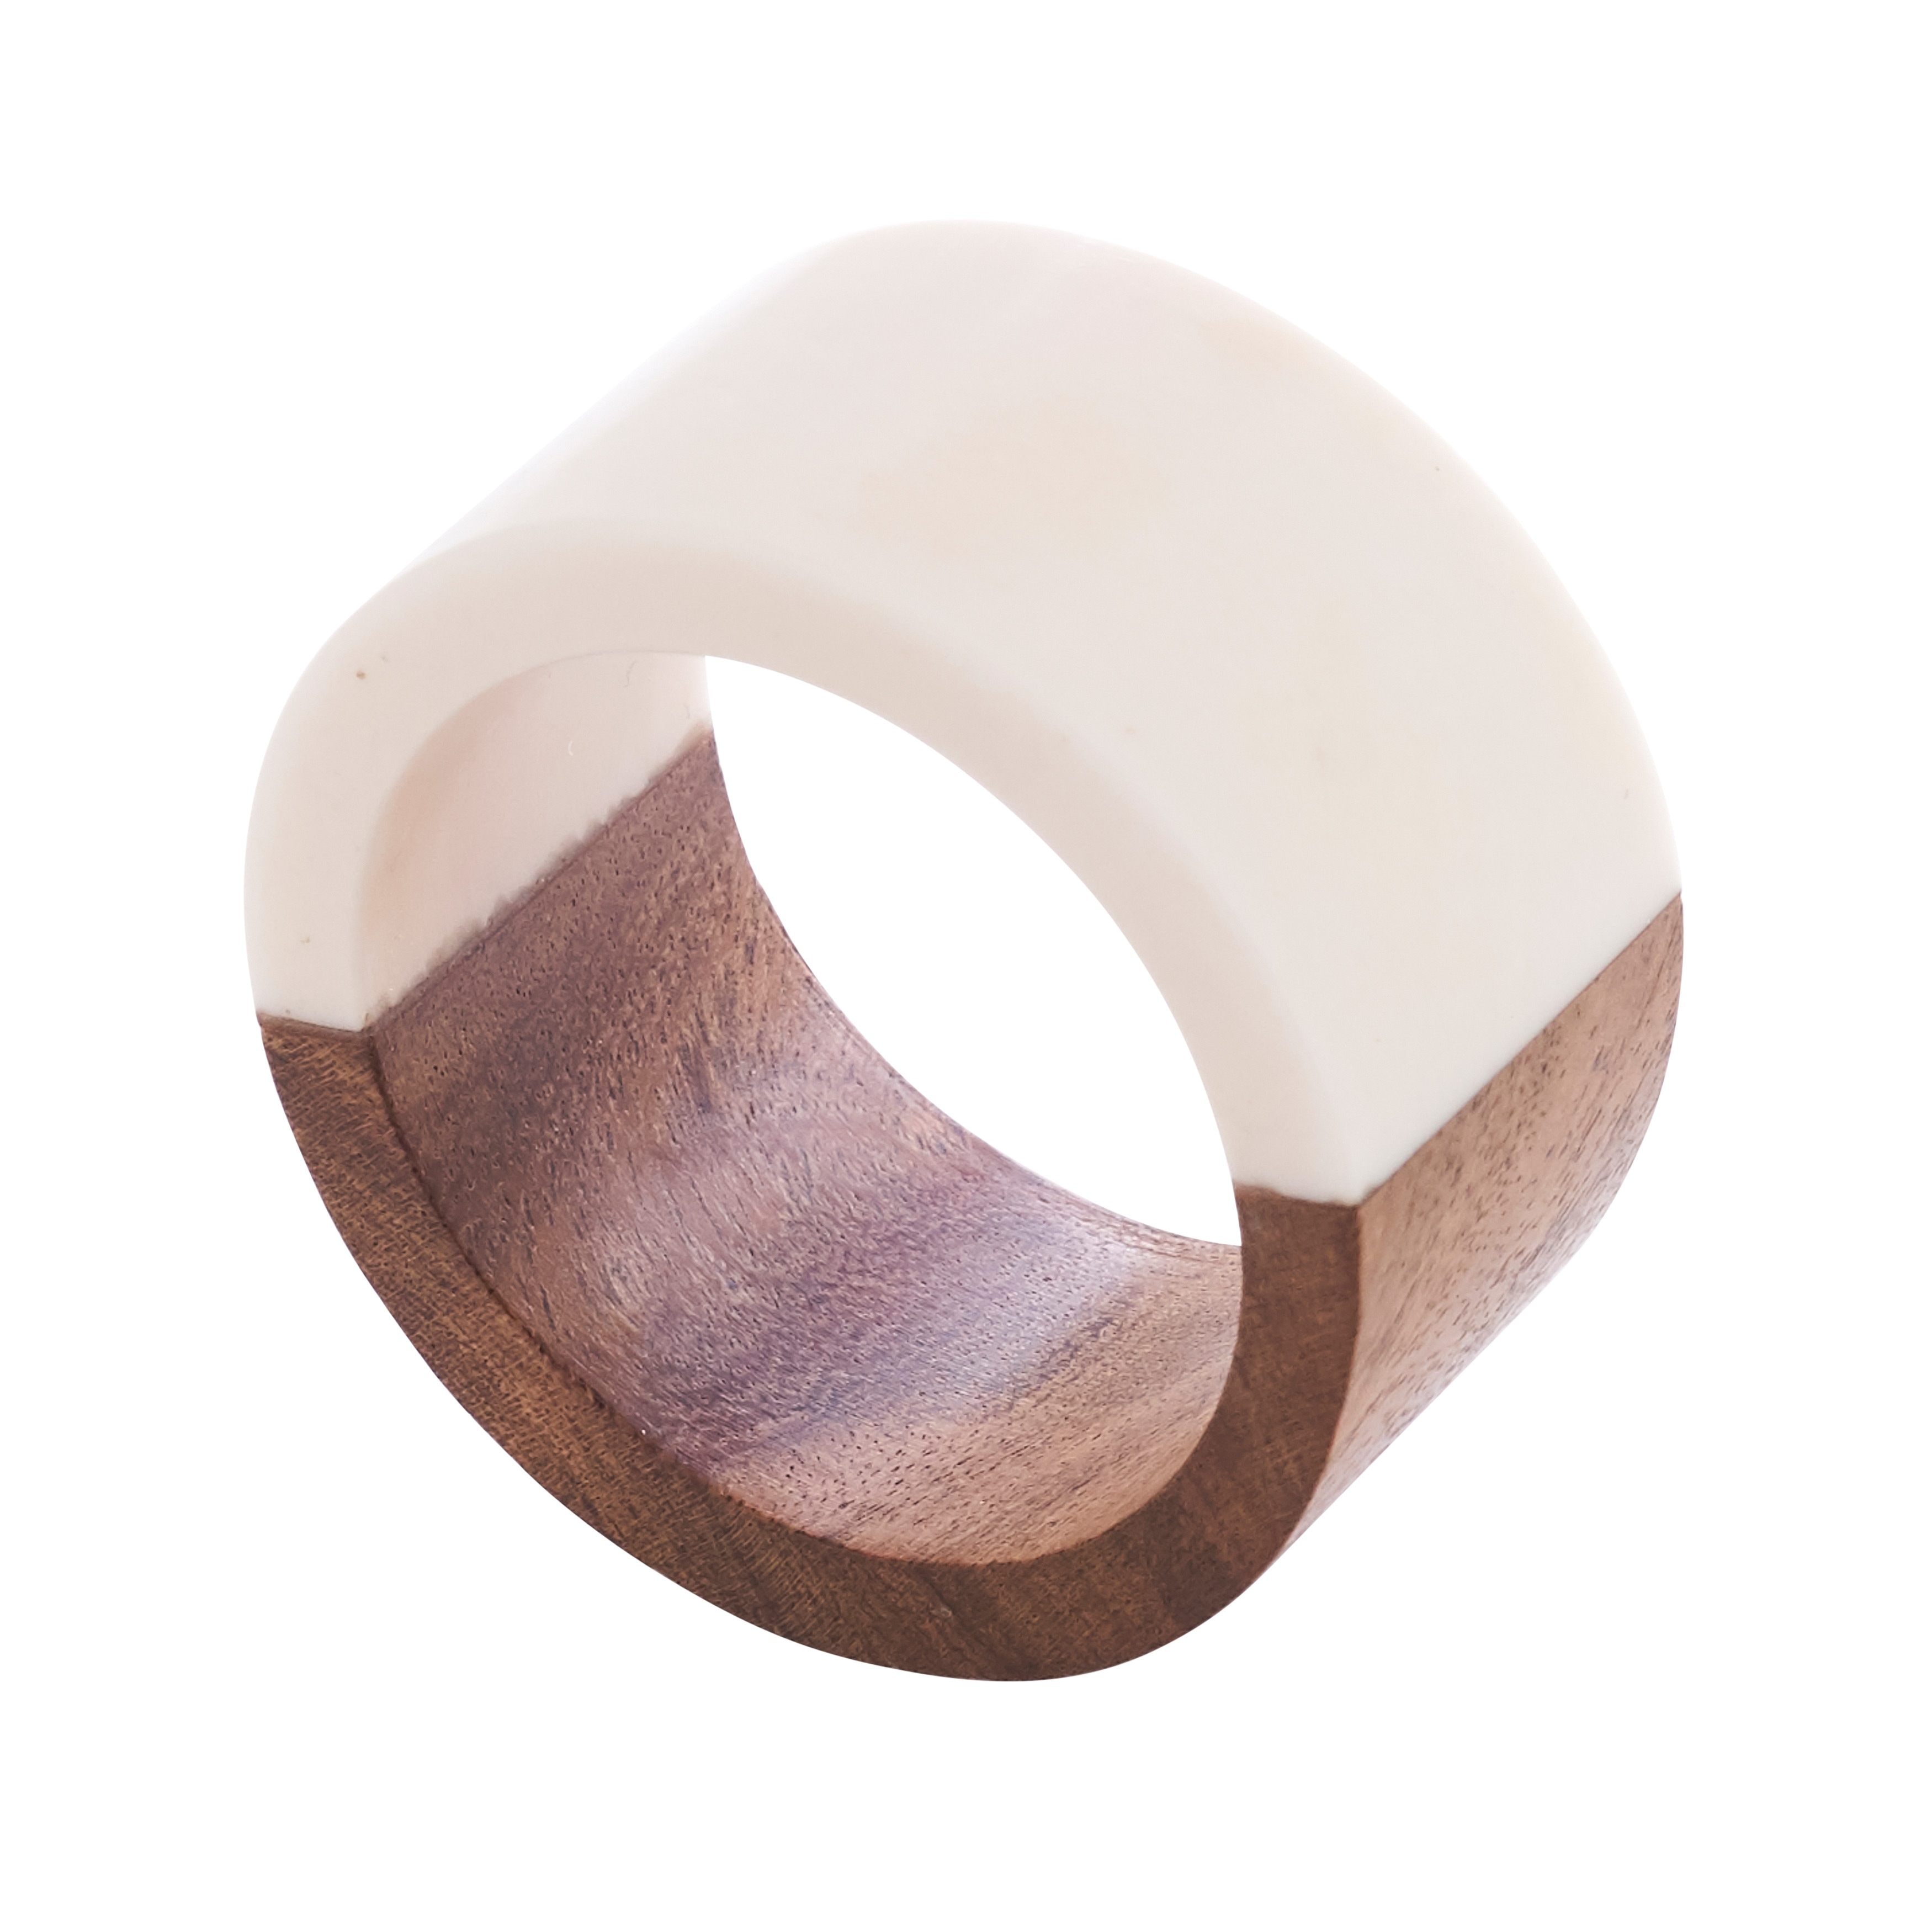 Wood Bangles Napkin Rings, set of four – Dot and Army